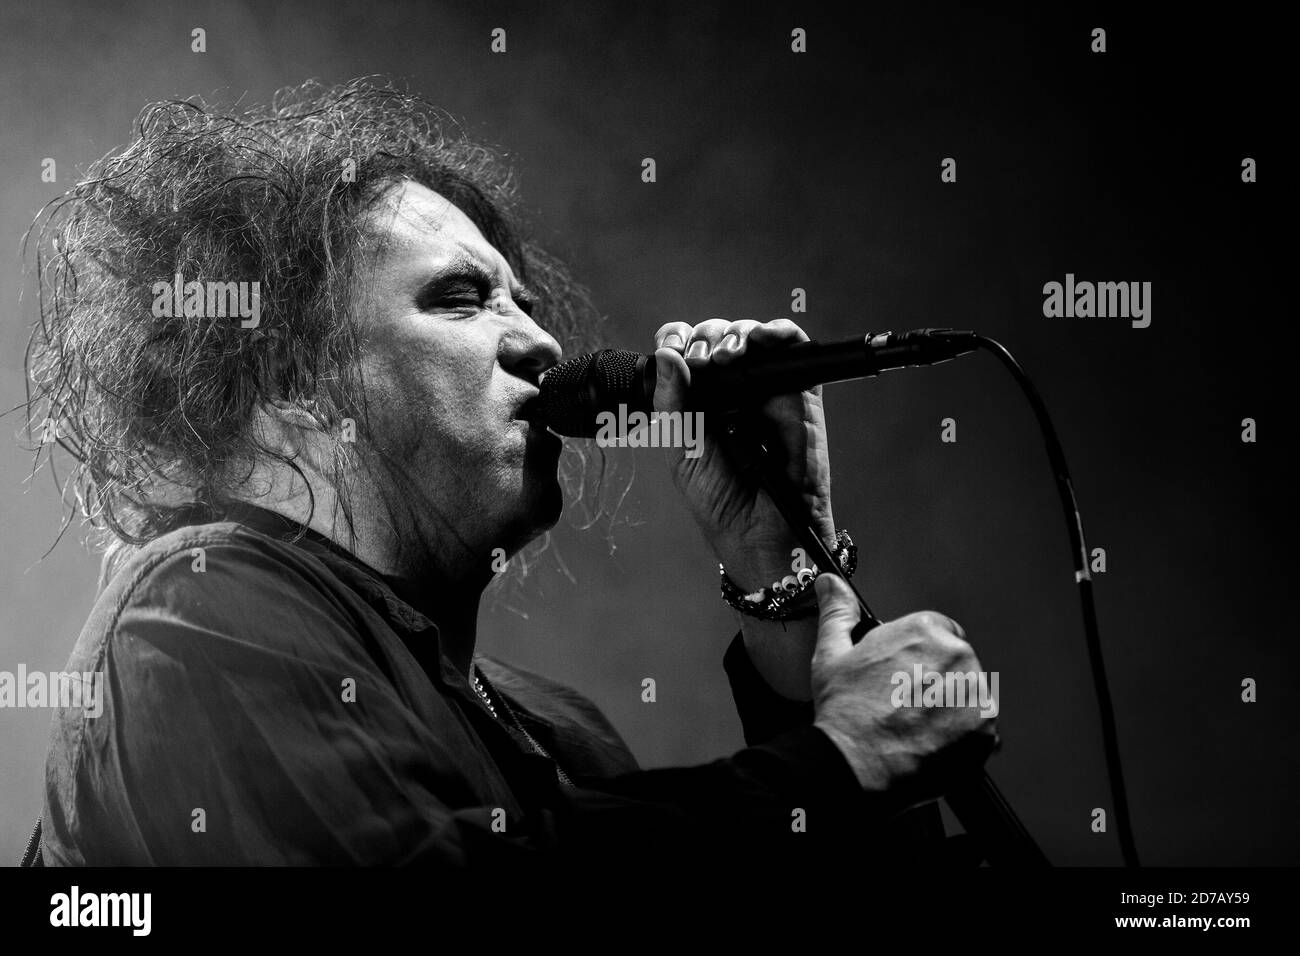 Copenhagen, Denmark. 14th, October 2016. The English rock band The Cure performs a live concert at Forum in Copenhagen. Here singer, songwriter and musician Robert Smith is seen live on stage. (Photo credit: Gonzales Photo - Lasse Lagoni). Stock Photo